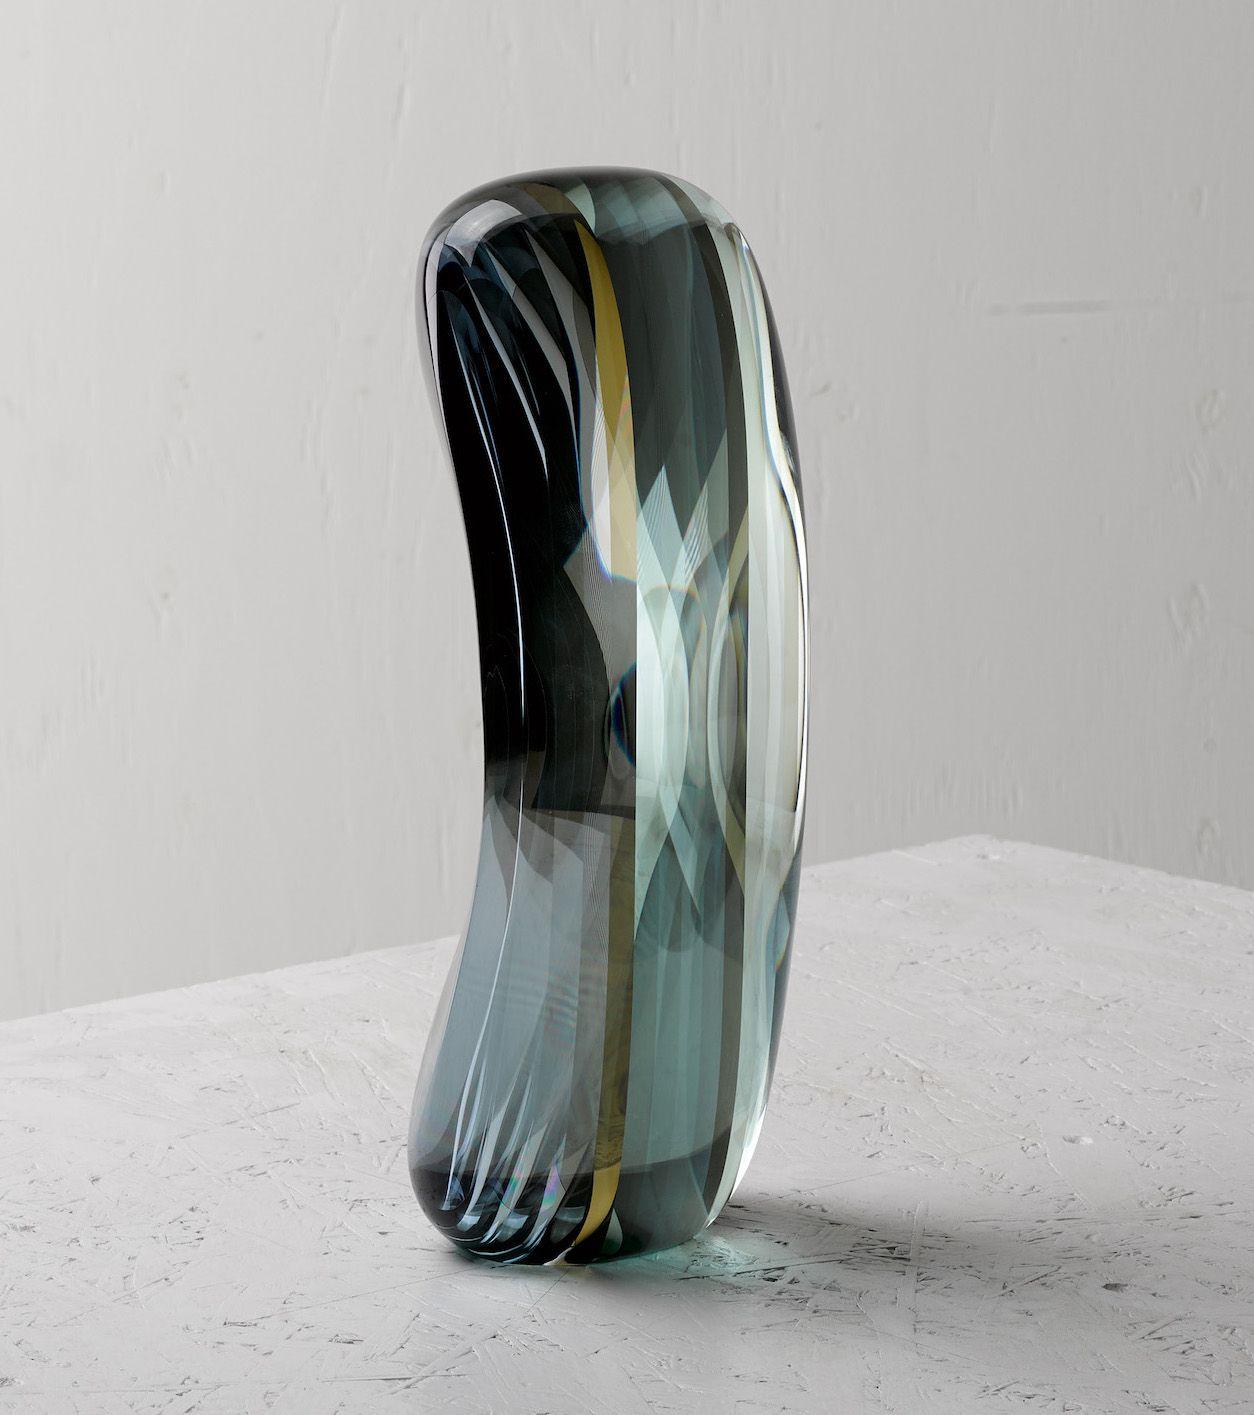 M.160302 by Toshio Iezumi - Glass, Vertical abstract sculpture